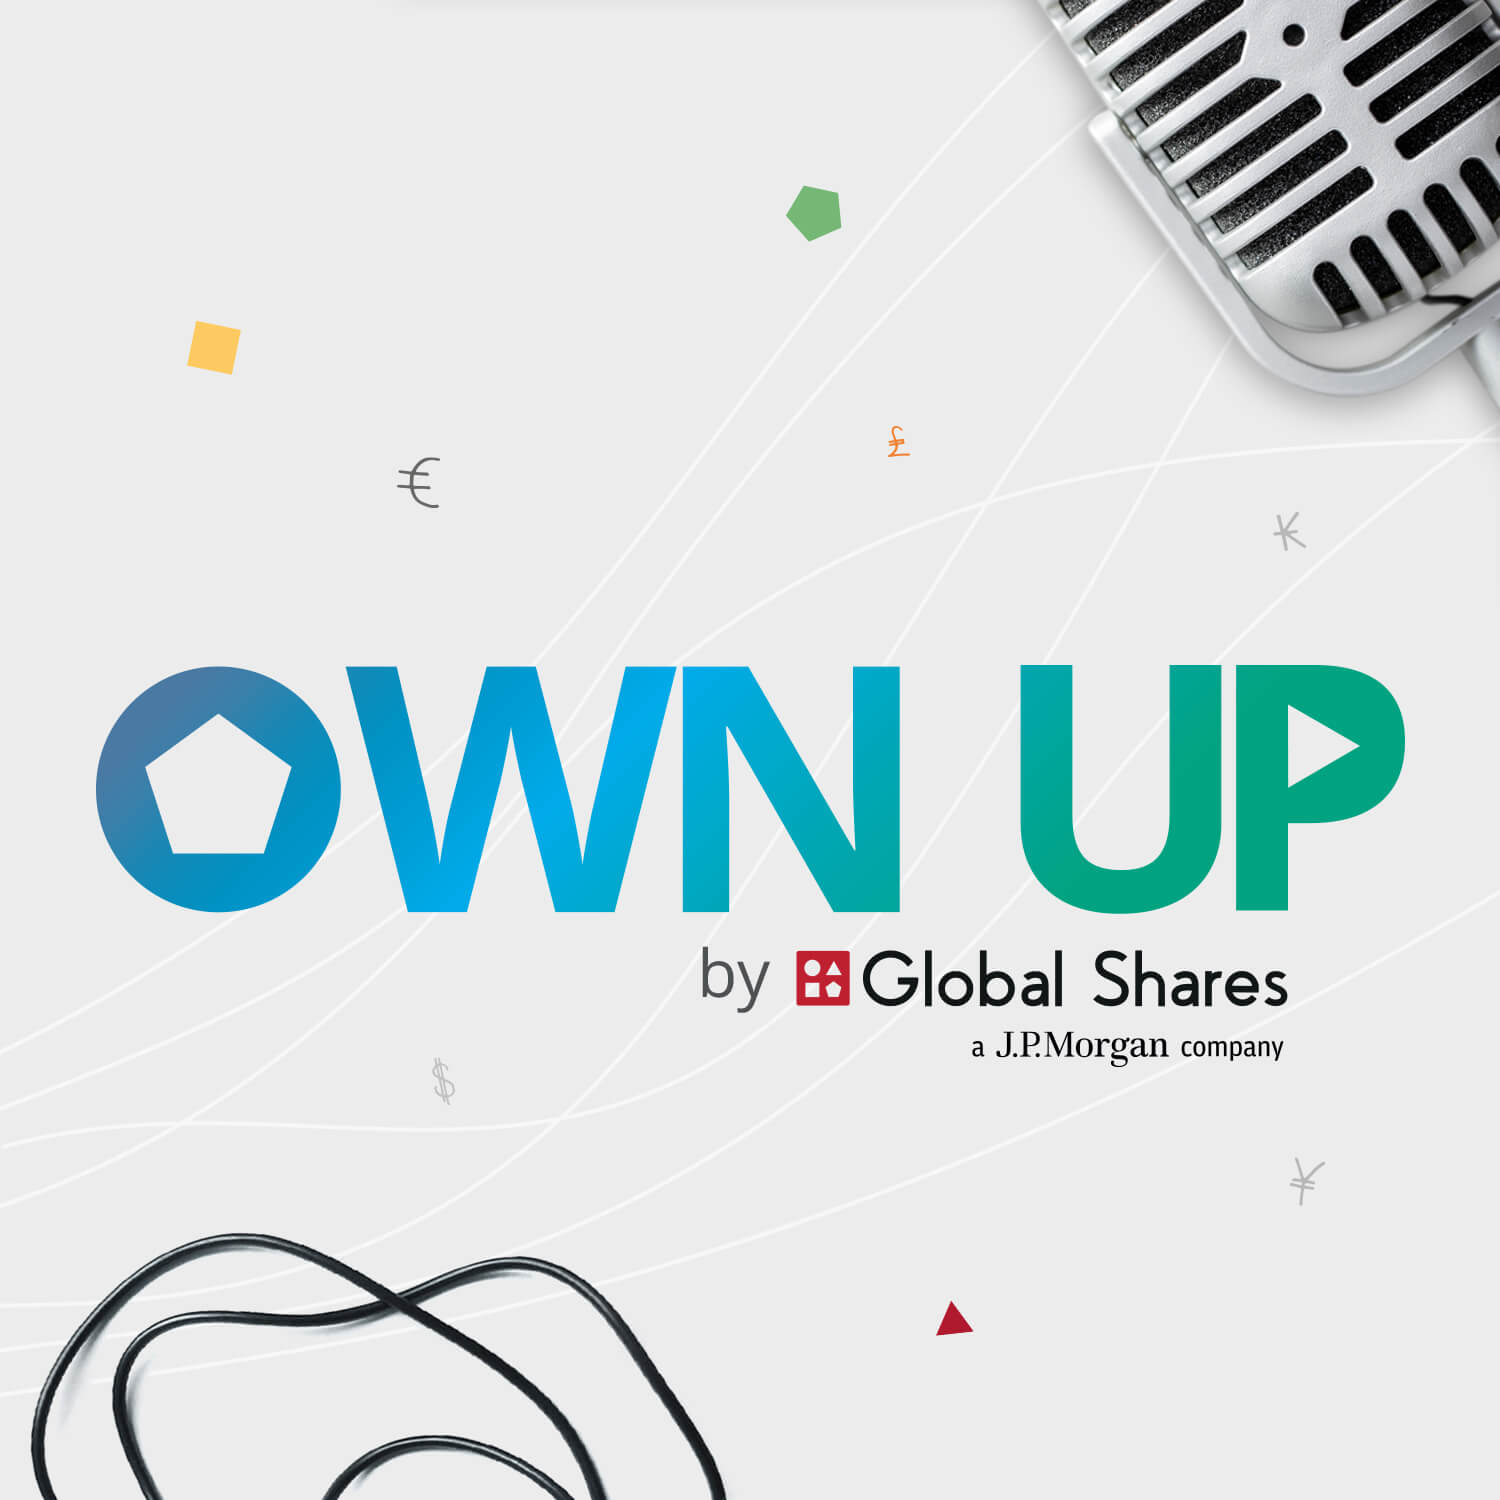 Ep 6: Going Public: IPOs, Early Employee Liquidity & More with Ben Cohen and Brittany Ruiz